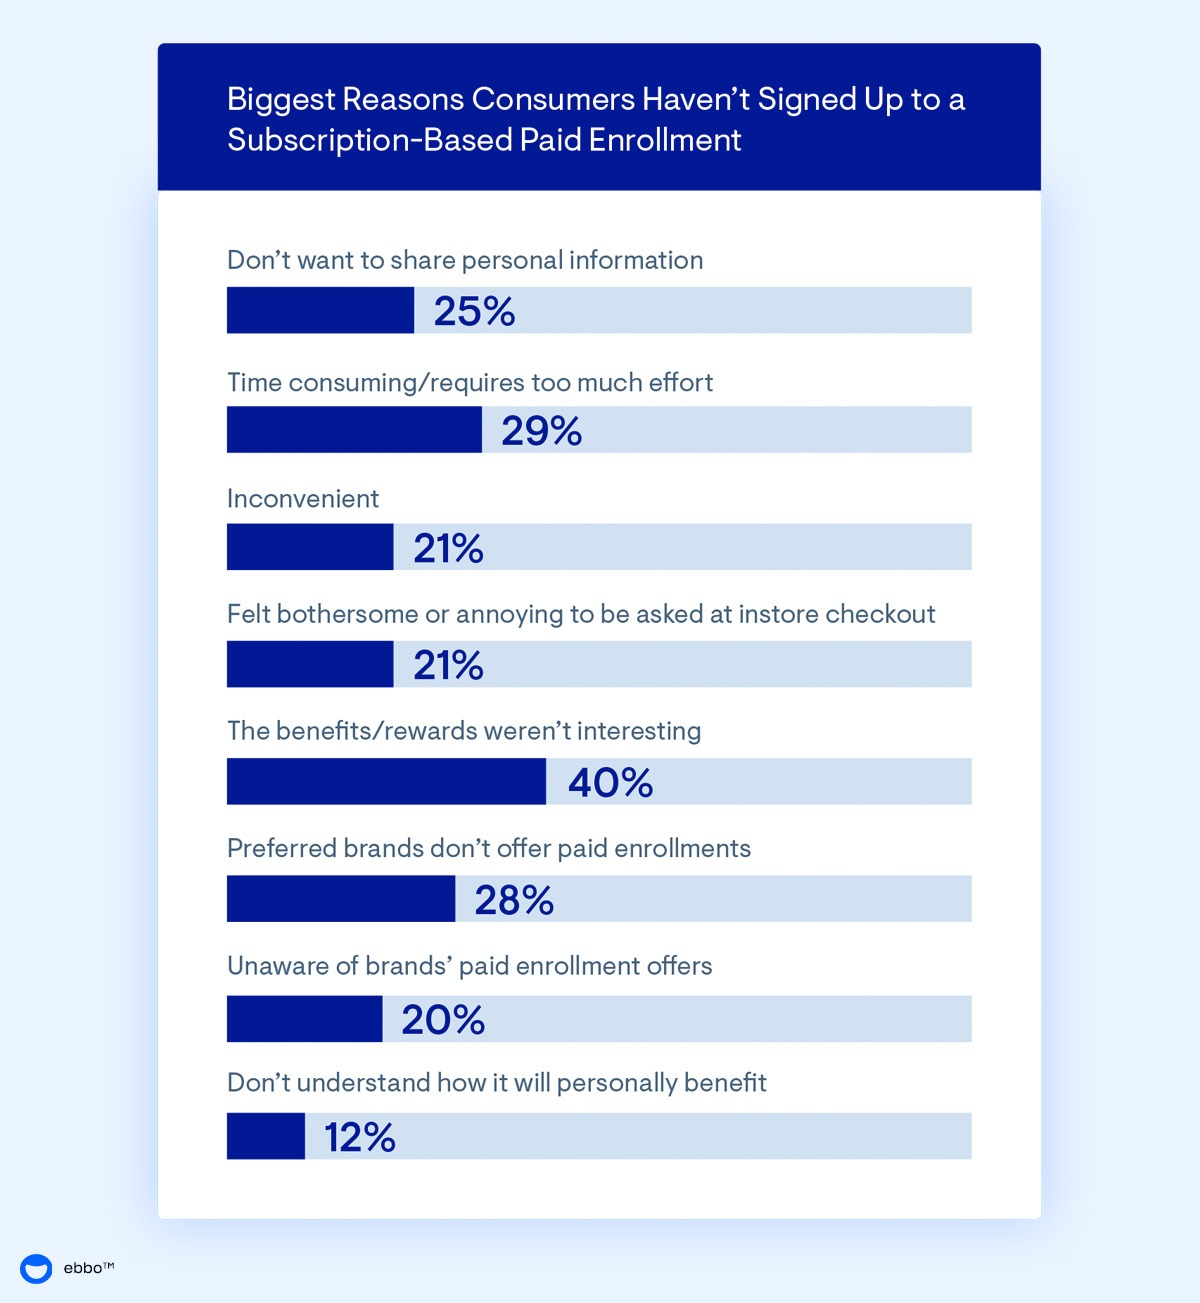 Chart showing the biggest reasons consumers haven't signed up for paid enrollments